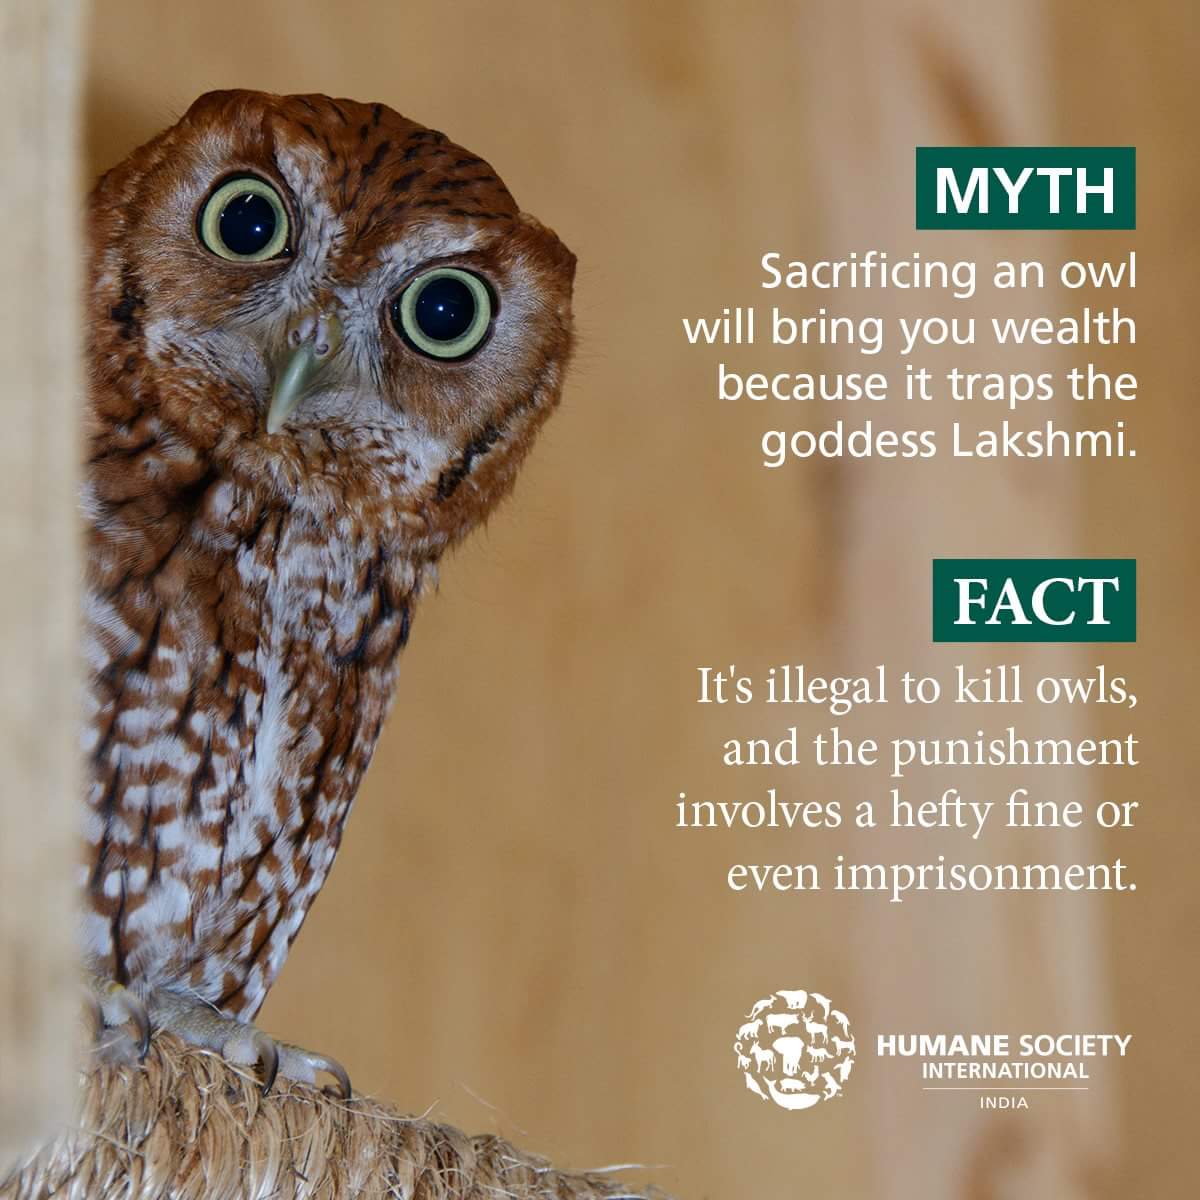 HSI/India on X: "MYTH 1: Owl sacrifice will bring you wealth . FACT is  killing owls or trading land you in jail! Dont sacrifice them.  #Give2Hoots4Owls https://t.co/9rRhRYRw5y" / X